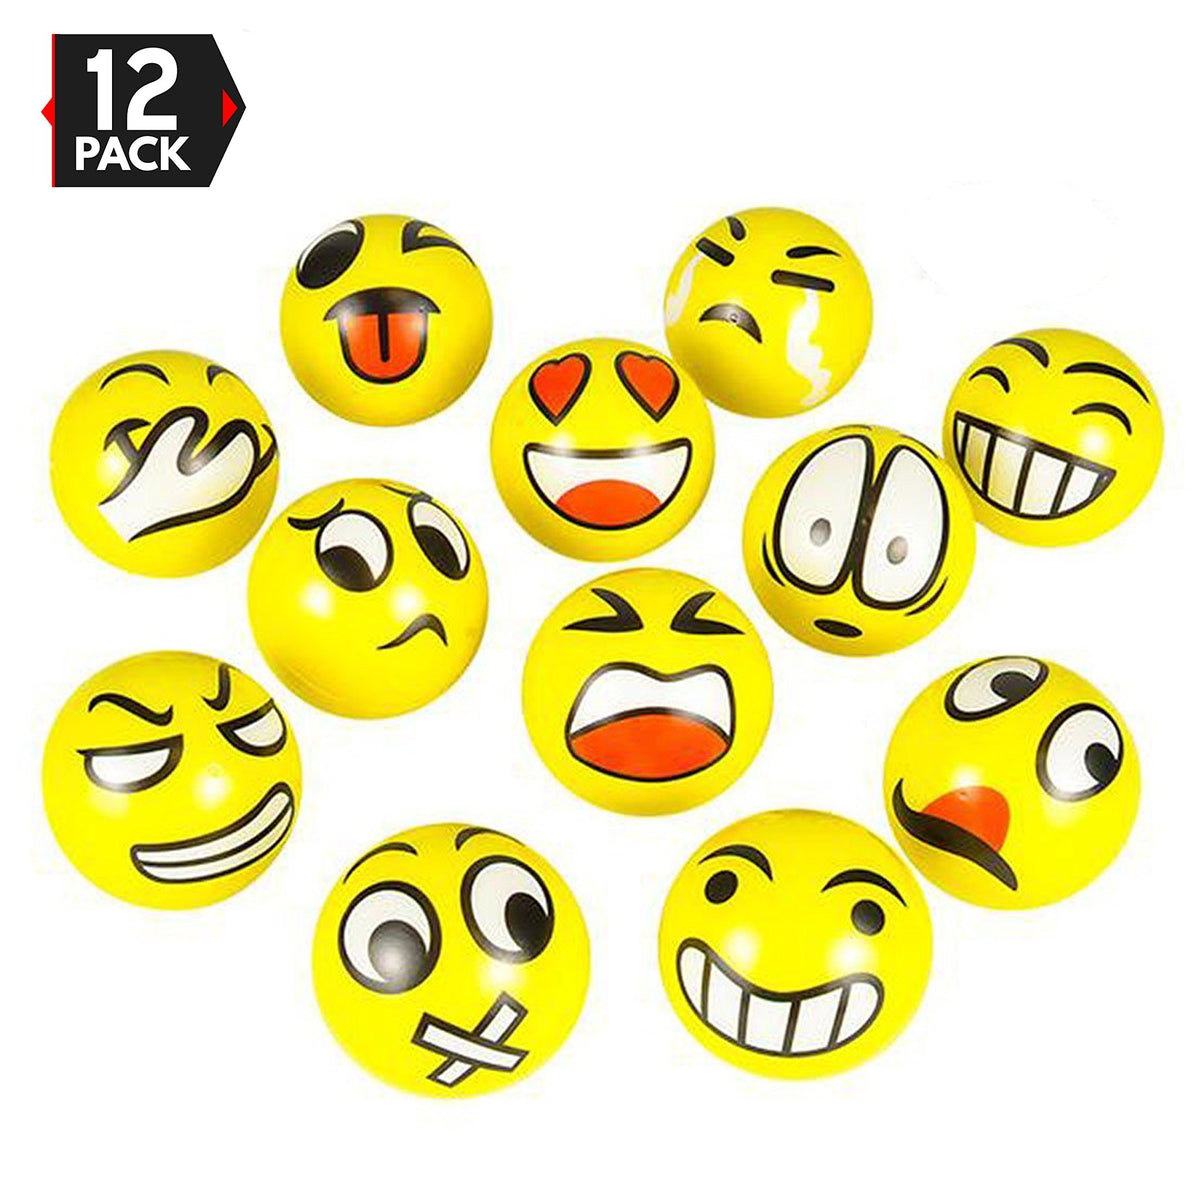 3 Party Pack Emoji Stress Balls Stress Reliver Party Favors, Toy Ball —